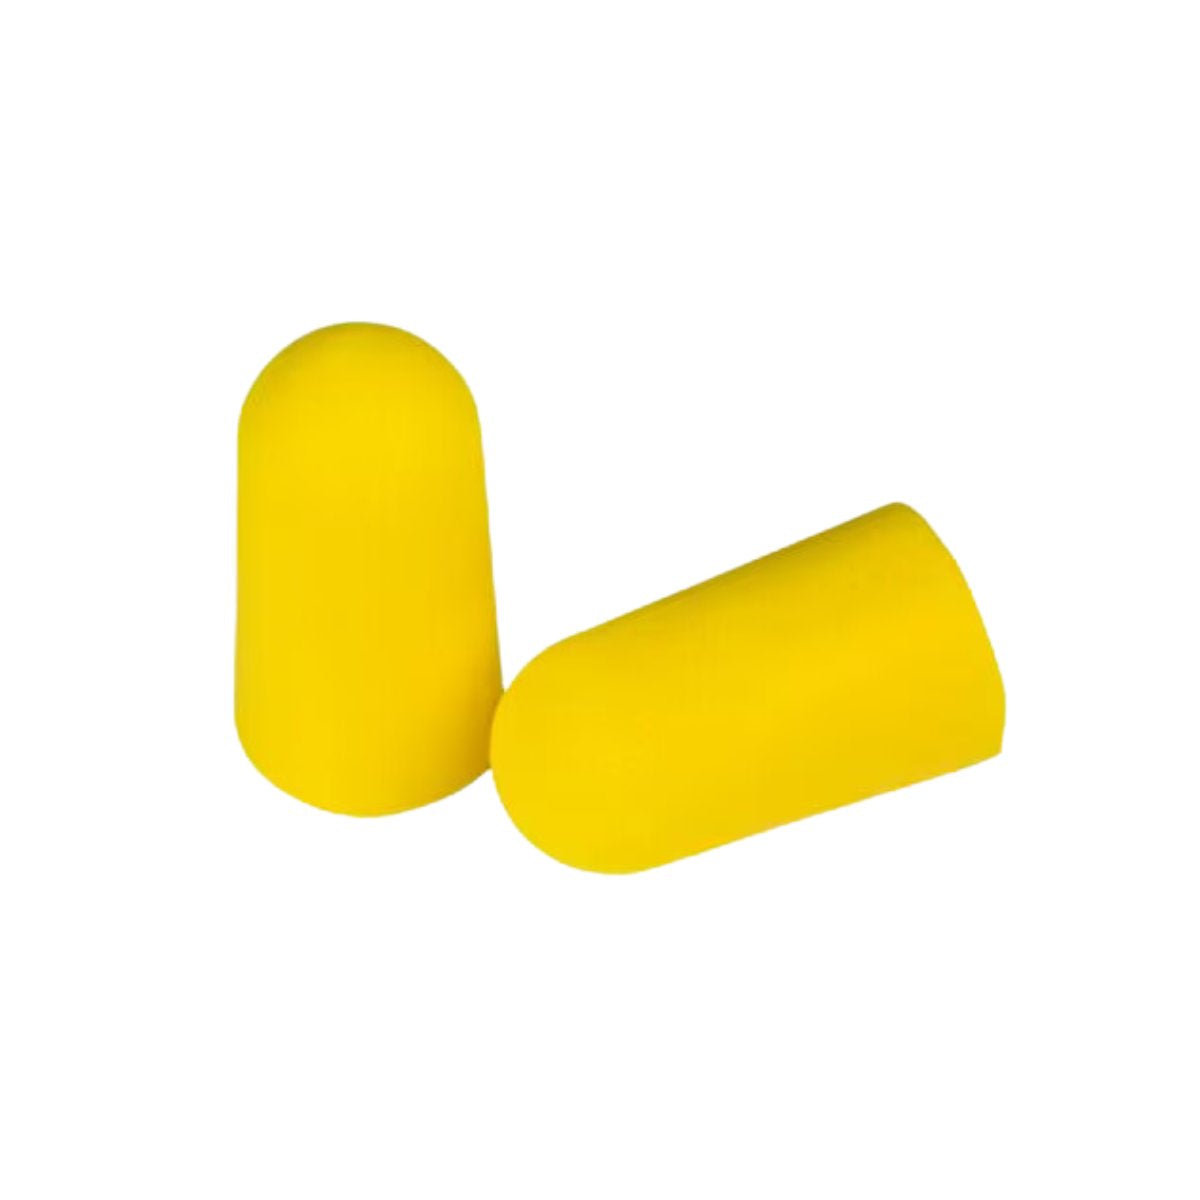 3M™ E-A-Rsoft™ TaperFit™ 2 Regular Uncorded Earplugs, Poly Bag, 312-1219,  26dB (Class 5) (Box of 200 Pairs)